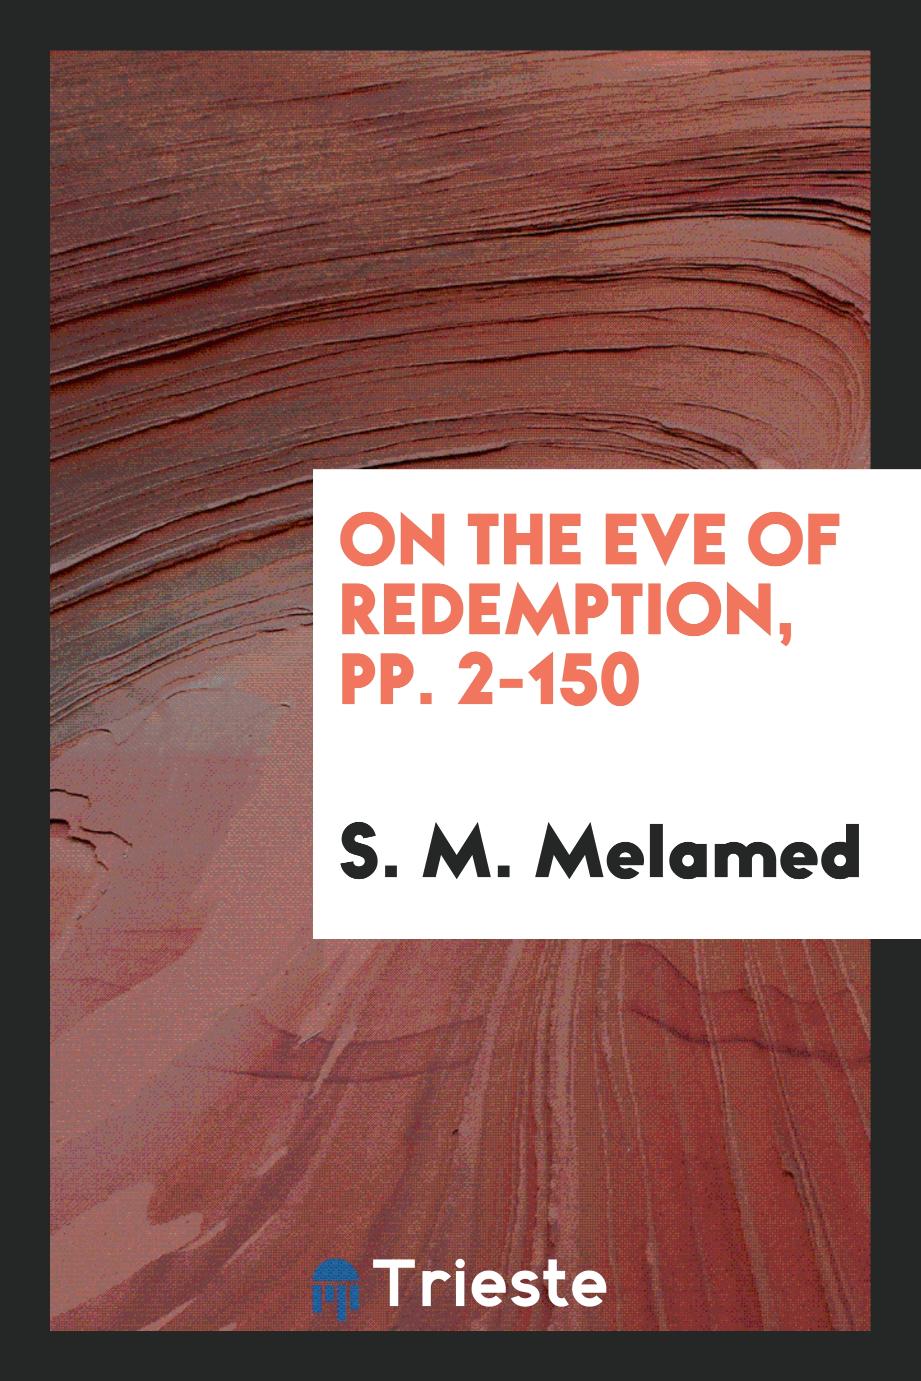 On the Eve of Redemption, pp. 2-150